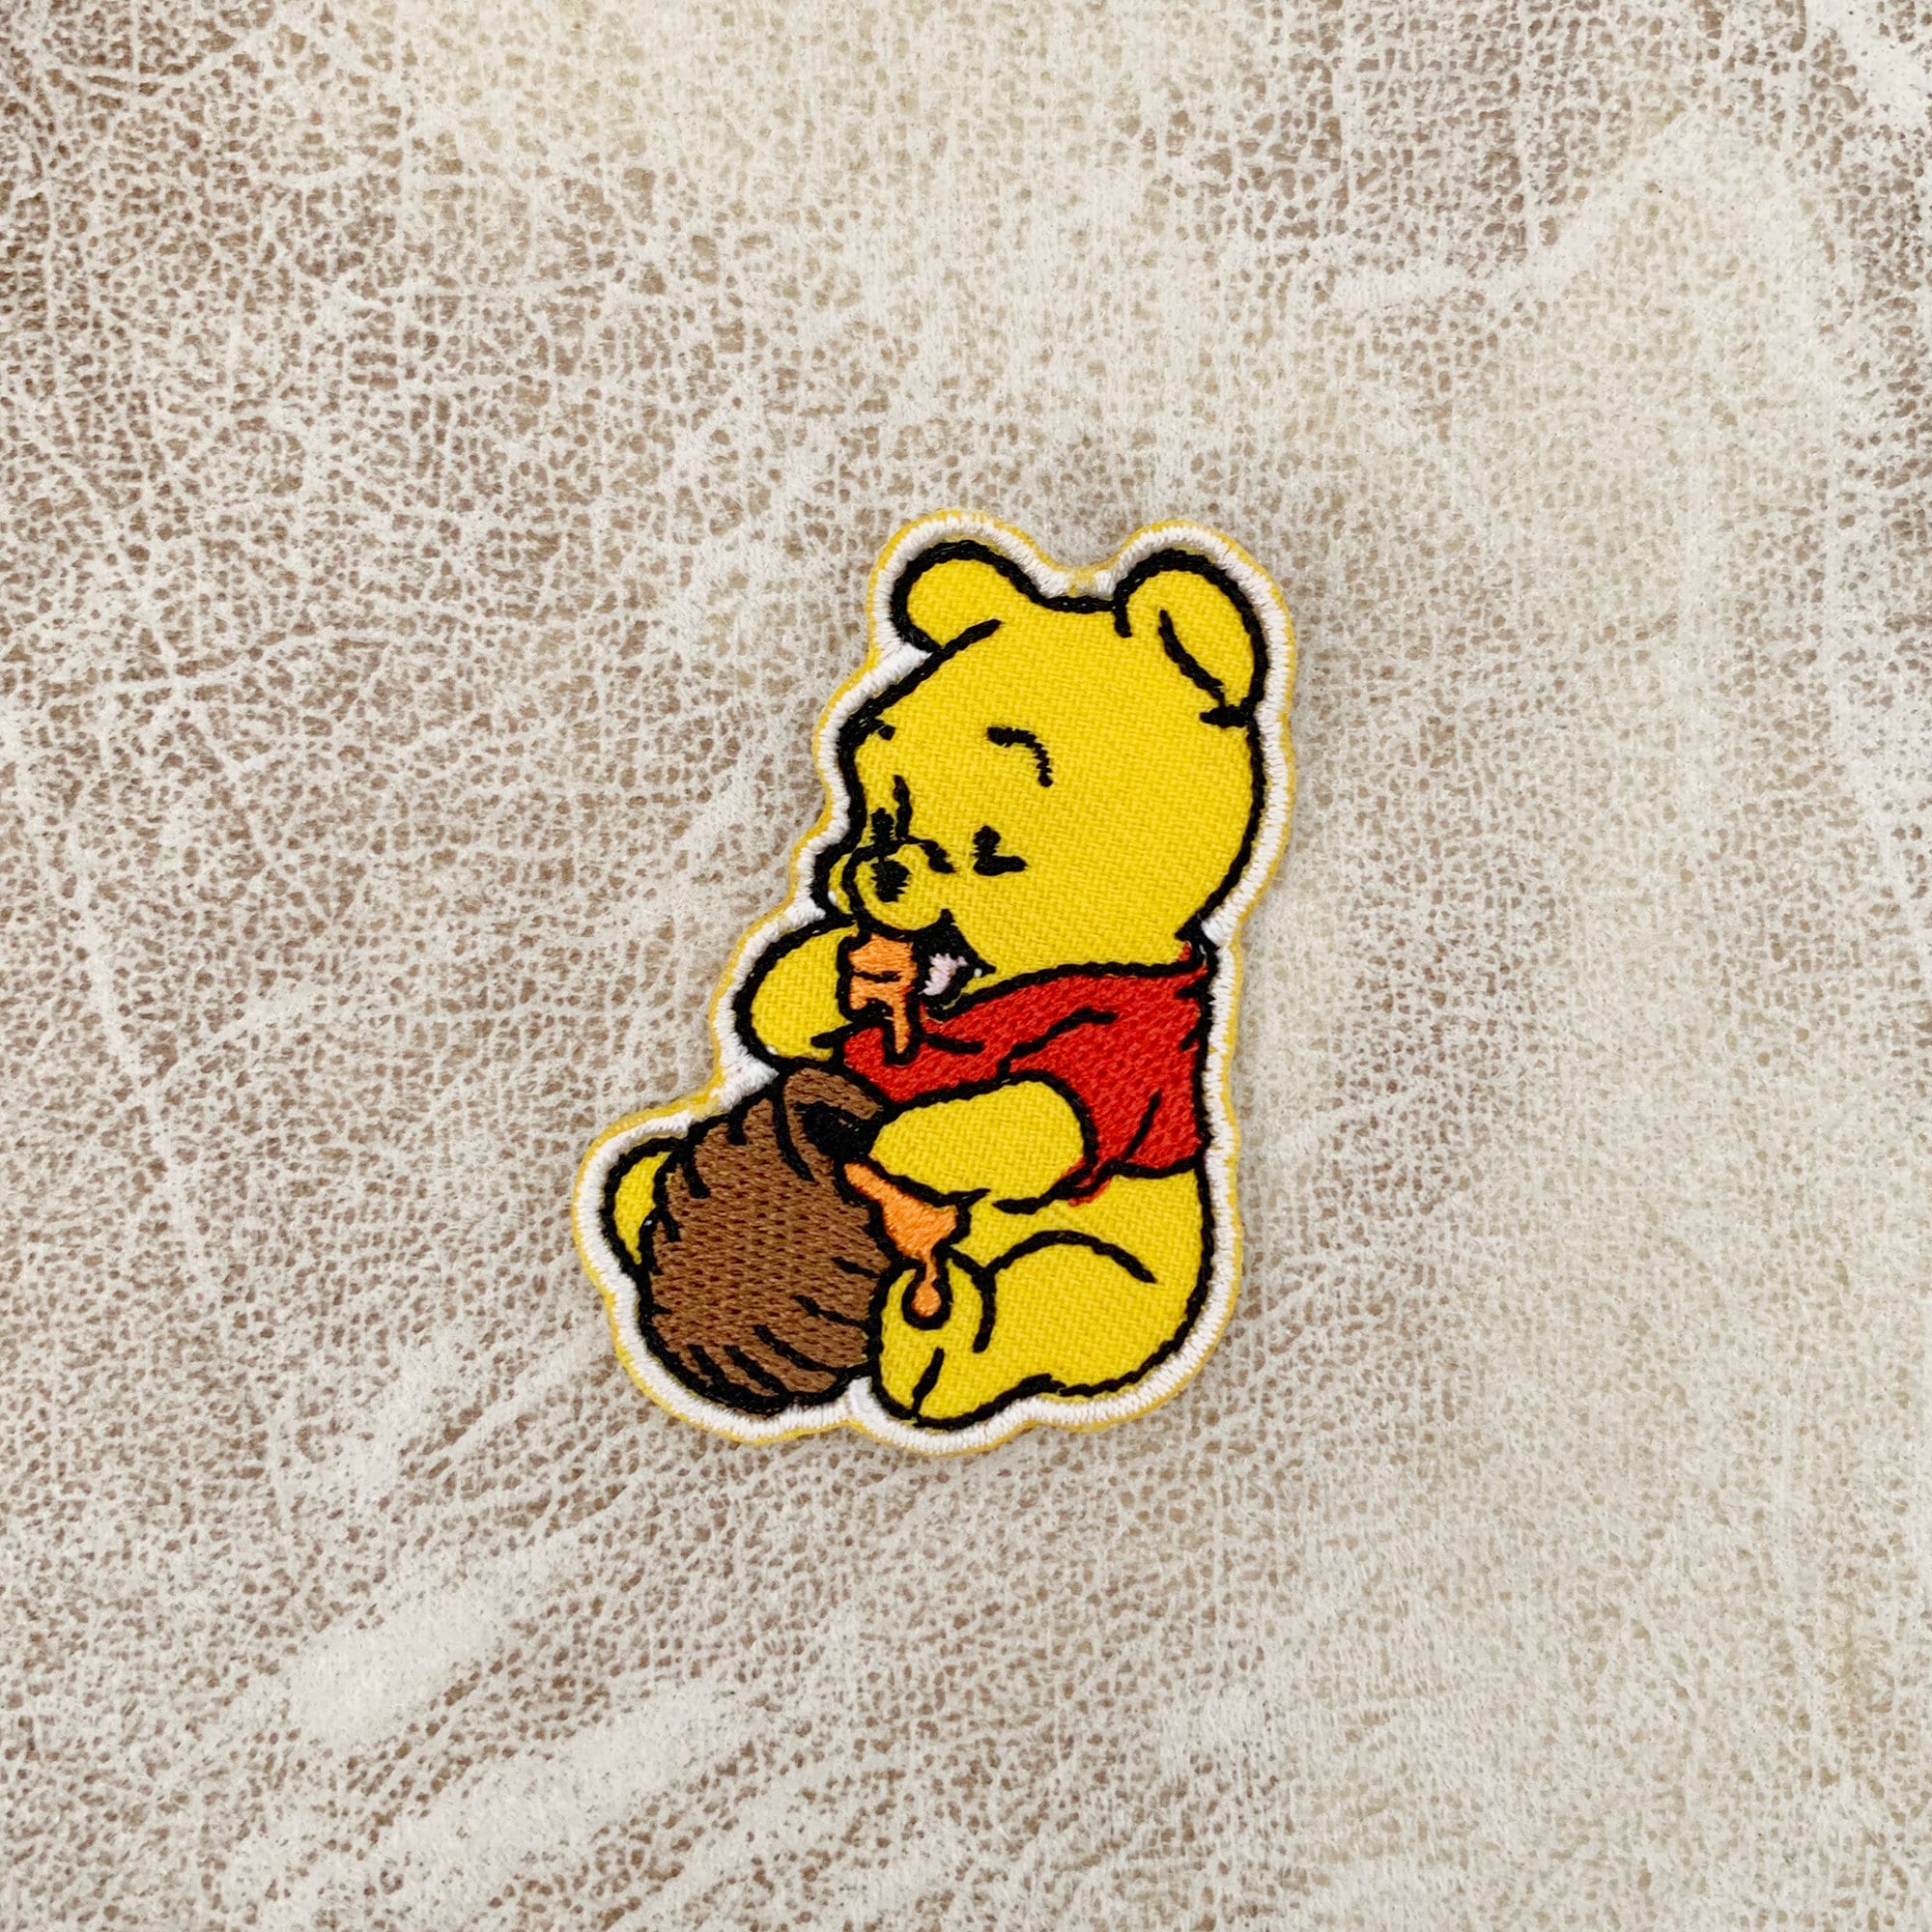 WINNIE THE POOH Disney Patch to Iron/ Sew on, Embroidered Cloth Patches,  Badge $5.25 - PicClick AU